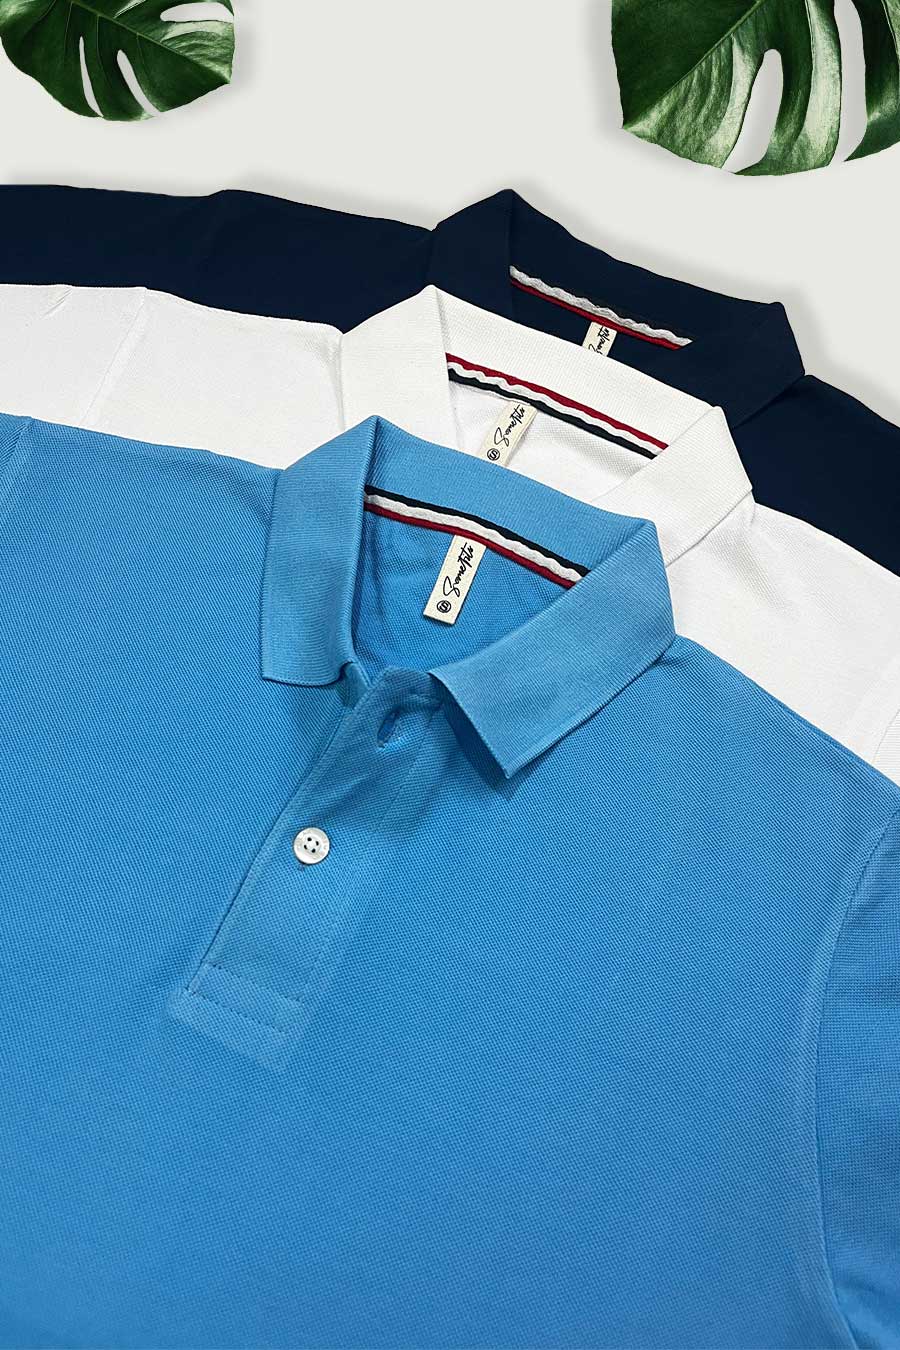 Pack 3 - White, Navy Blue & Sky Blue - Classic Polo